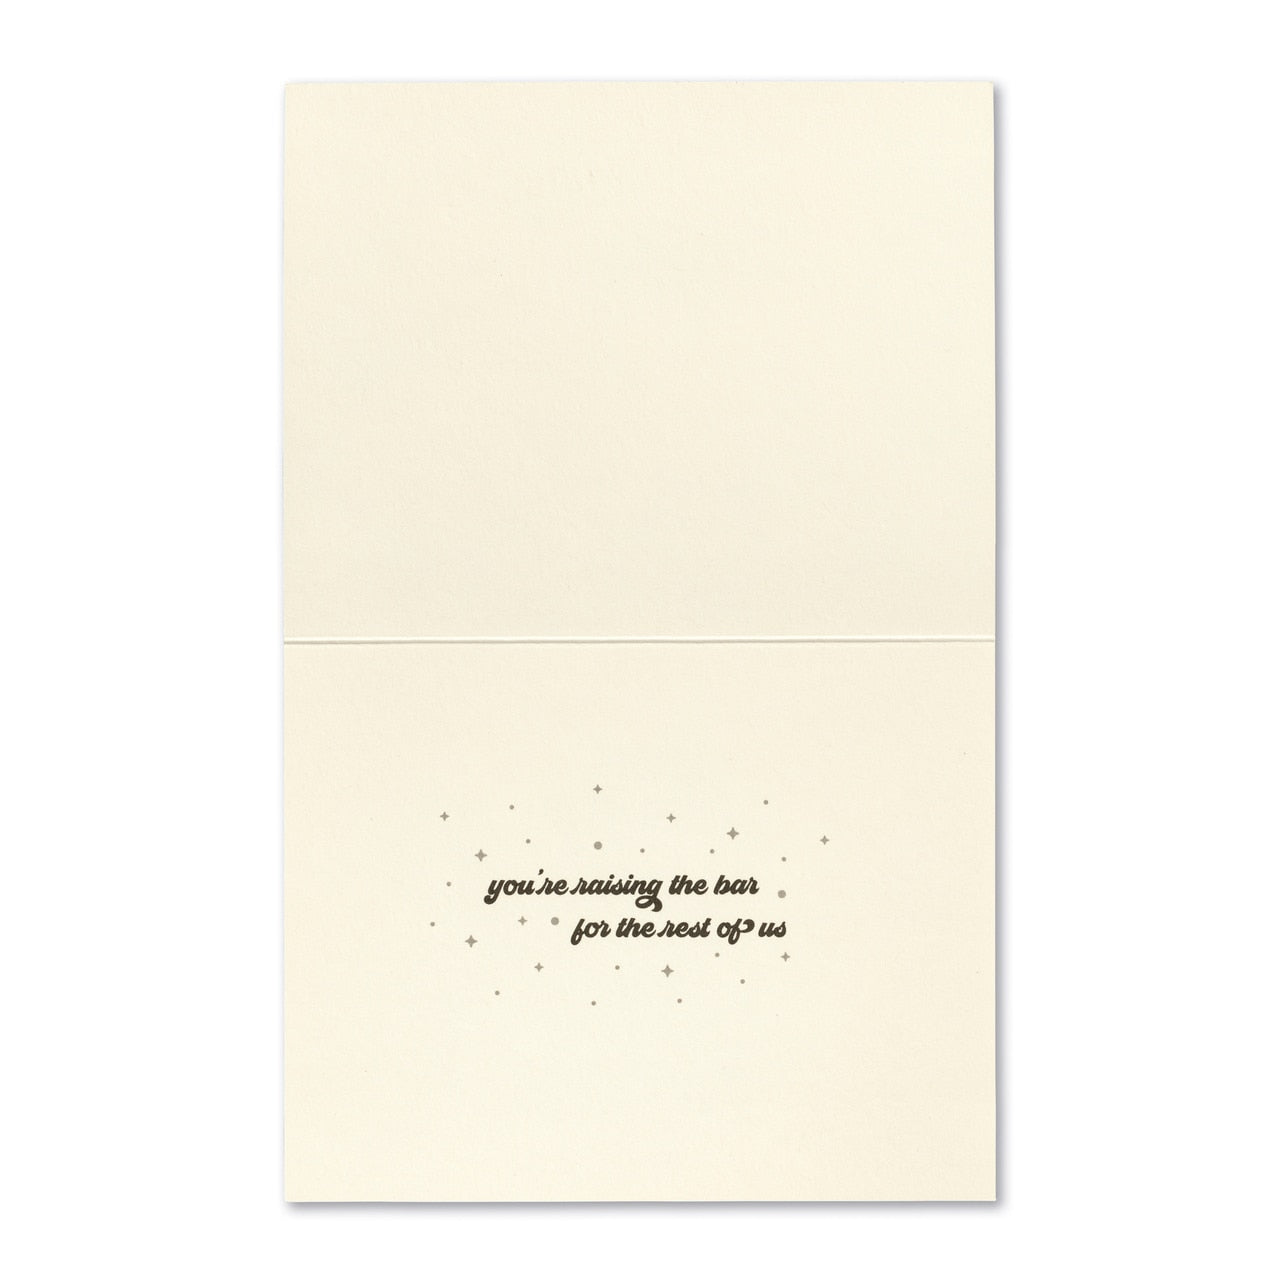 inside card is cream with inside text in black with stars